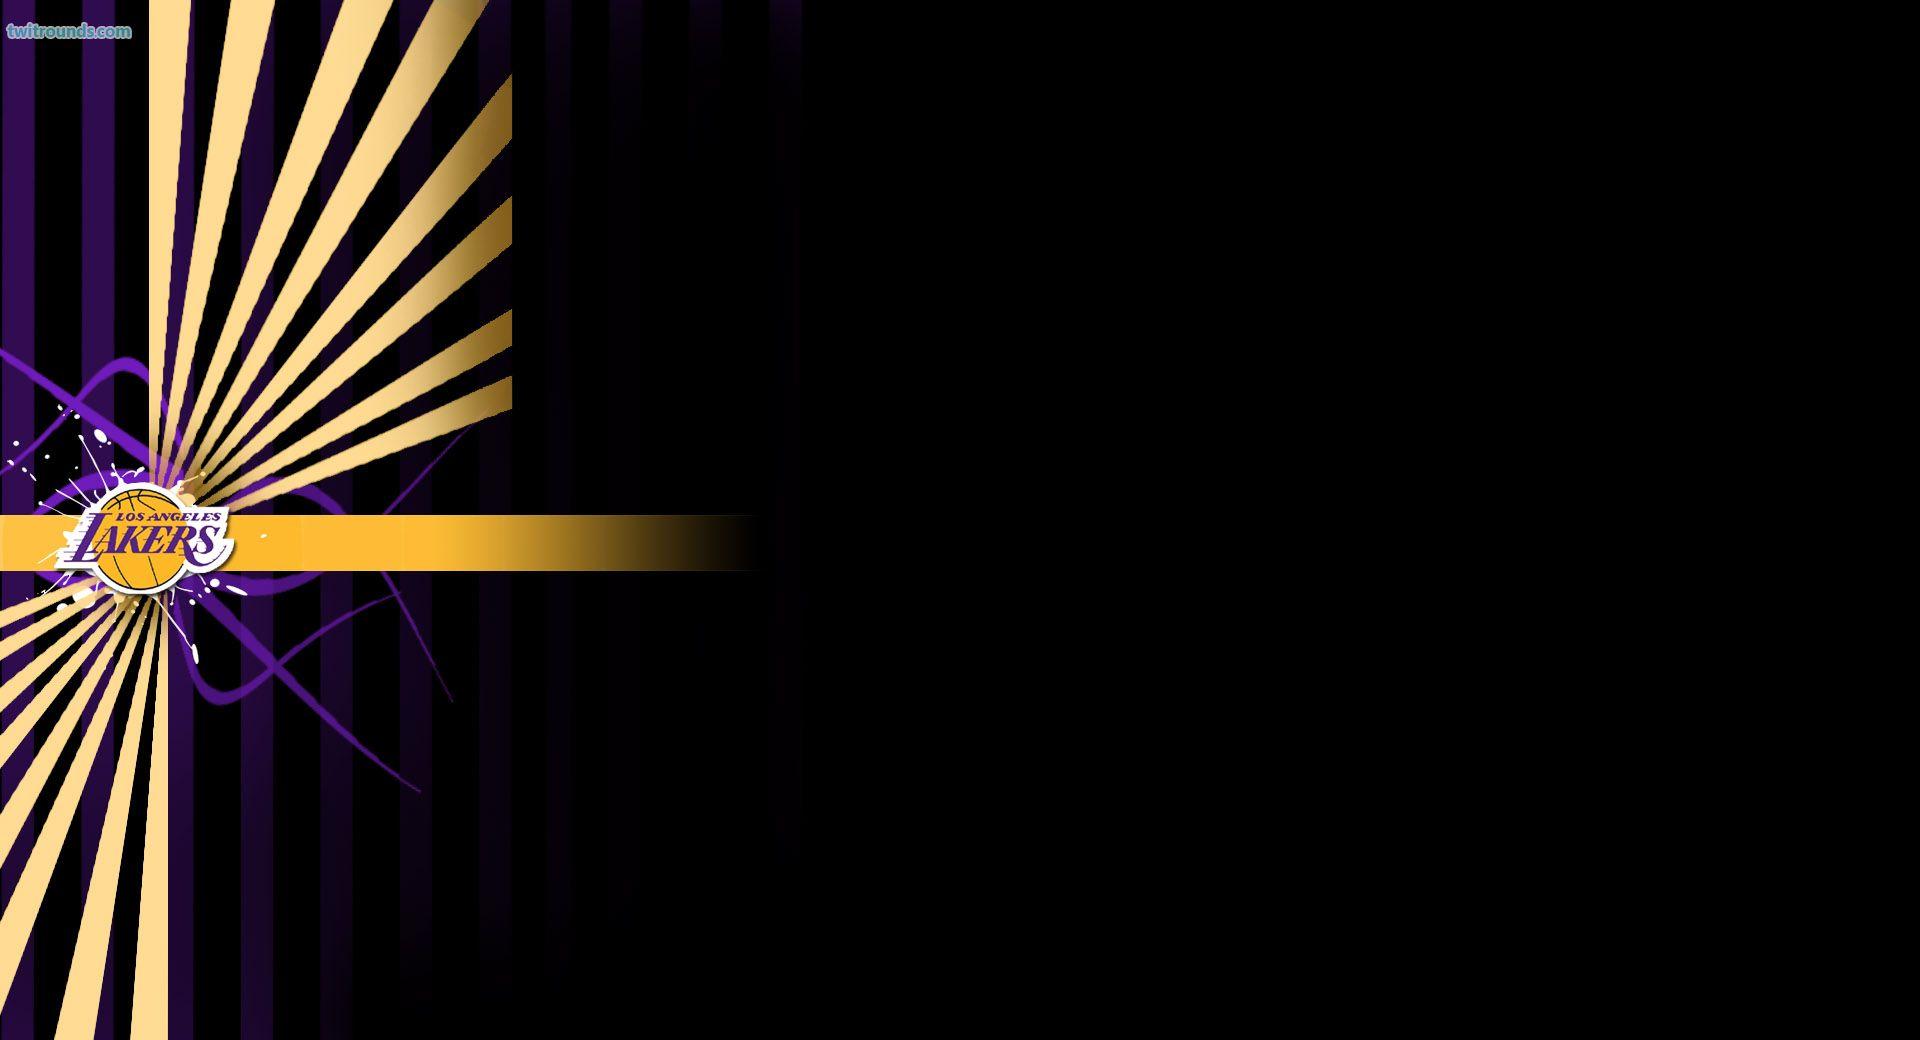 Lakers Image Background